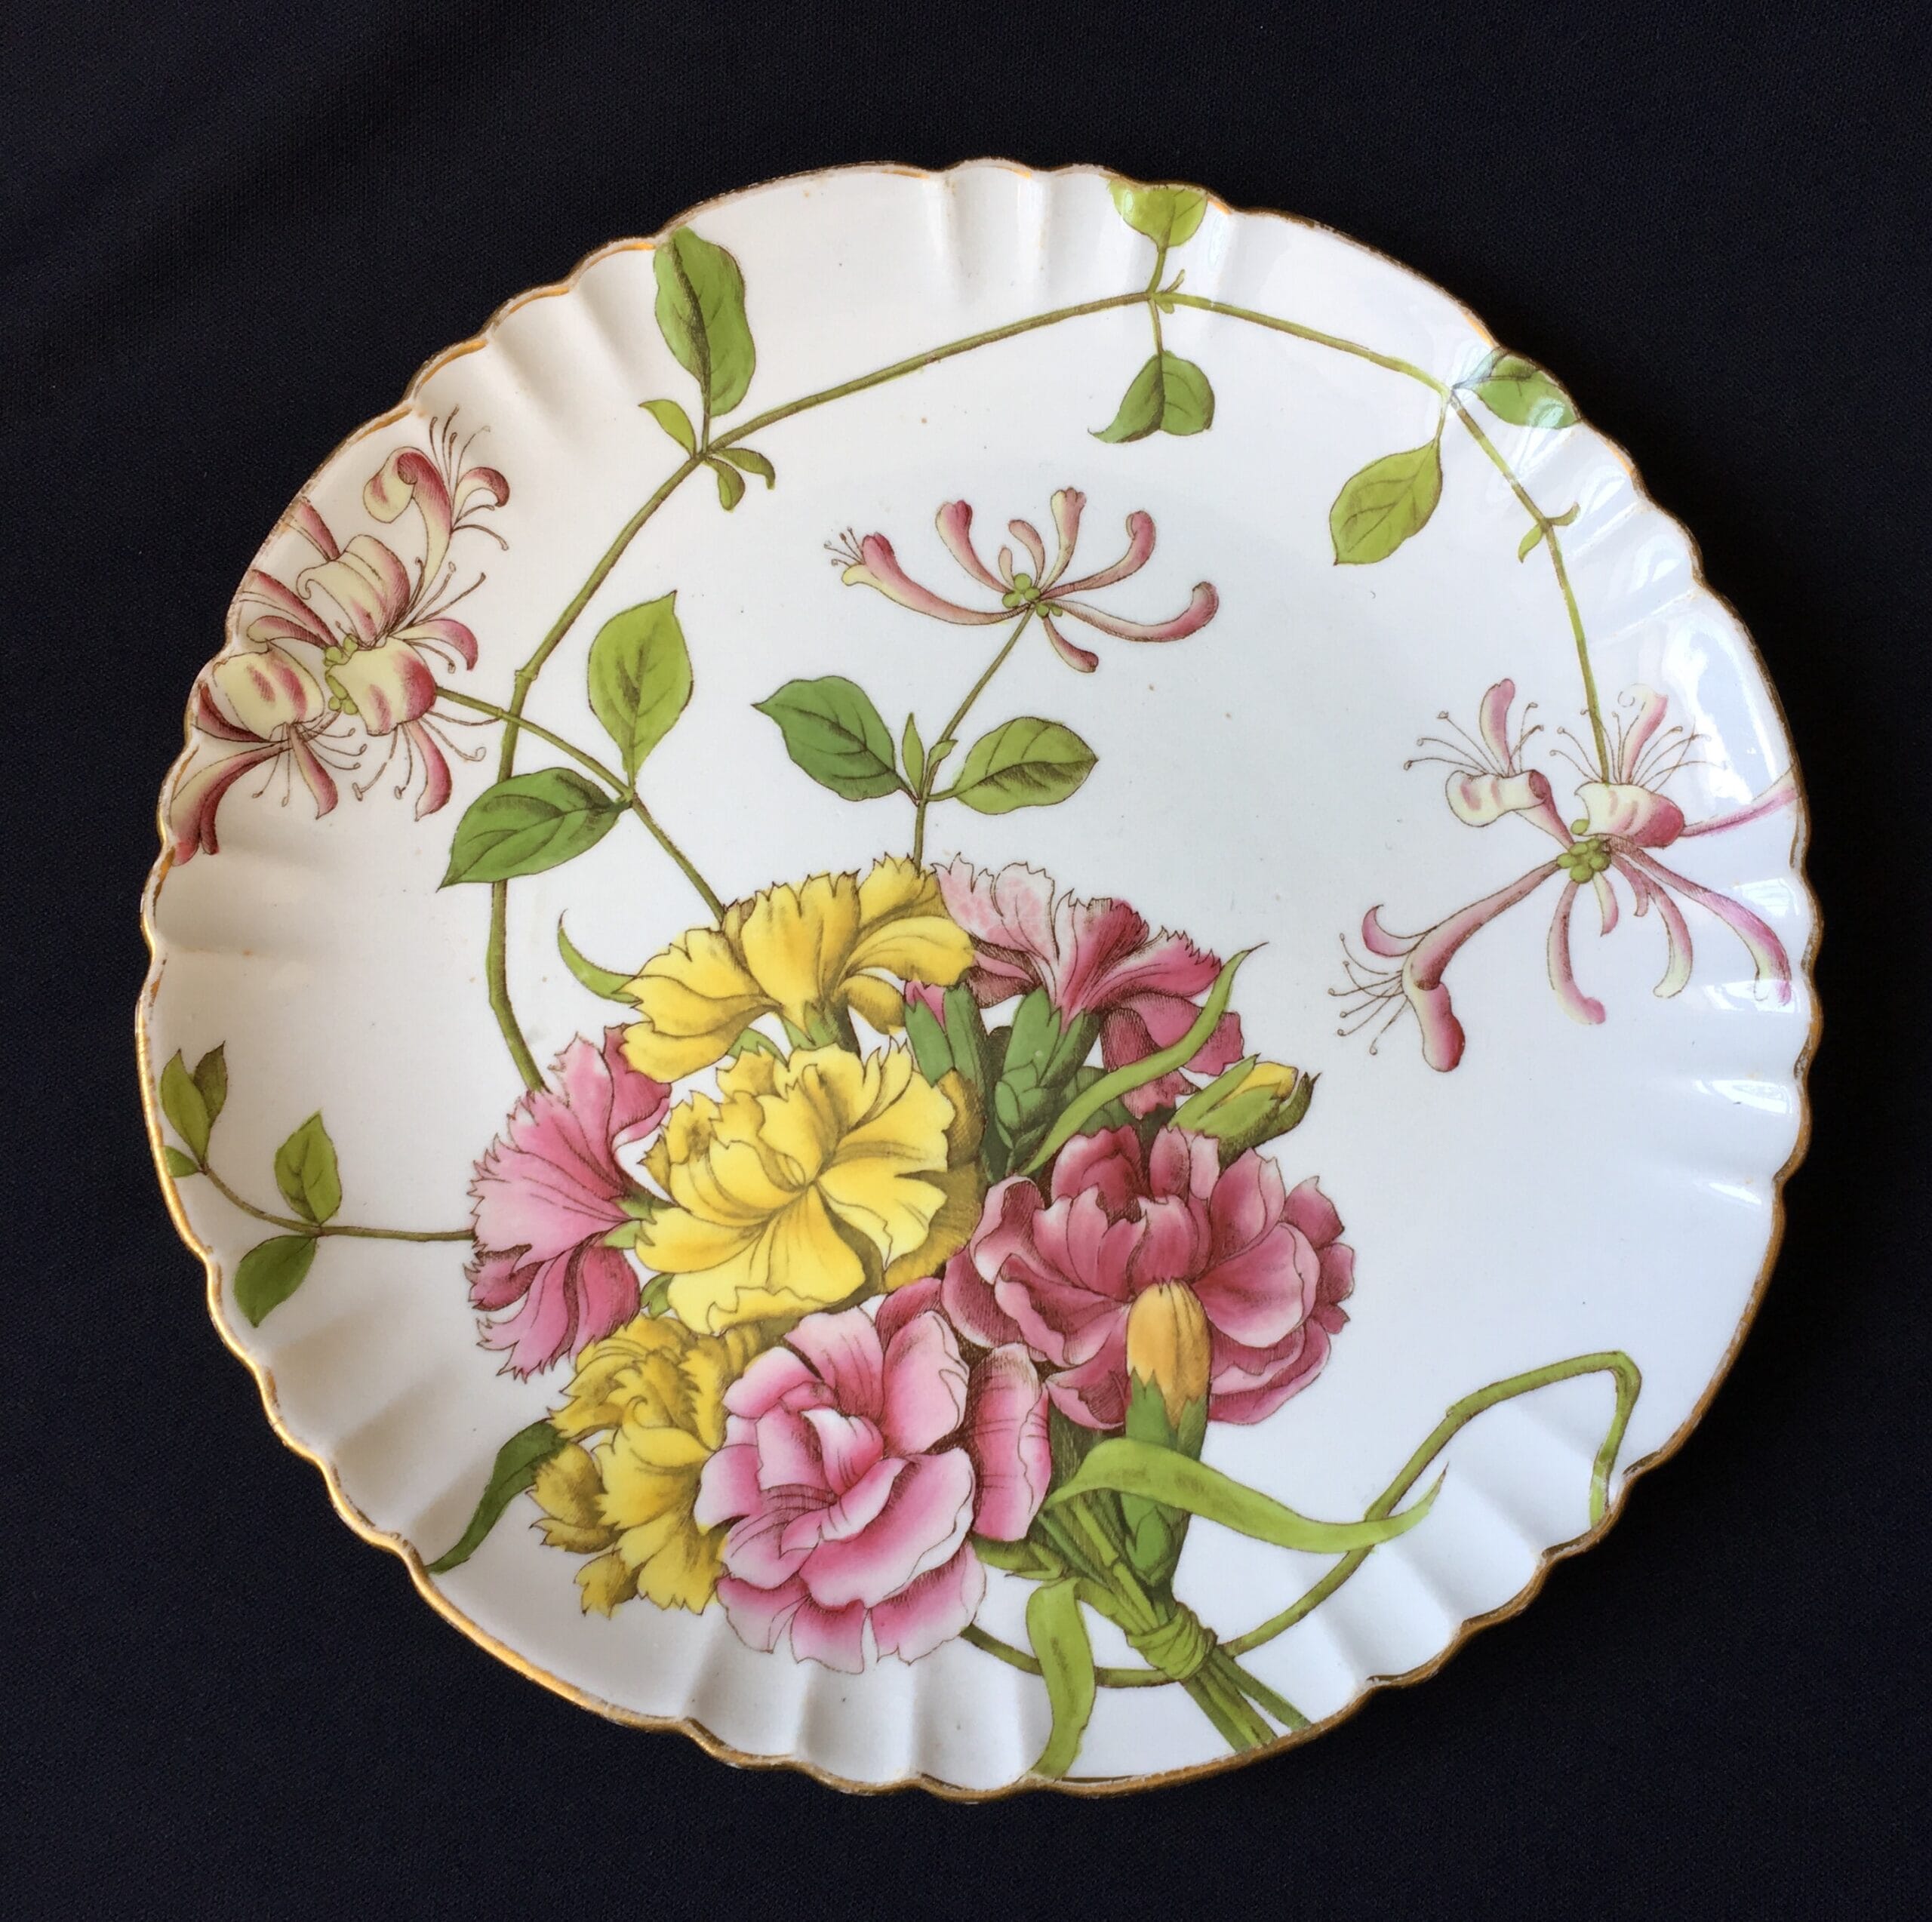 Minton plate, printed & painted with flowers, Melrose pattern c.1885-0